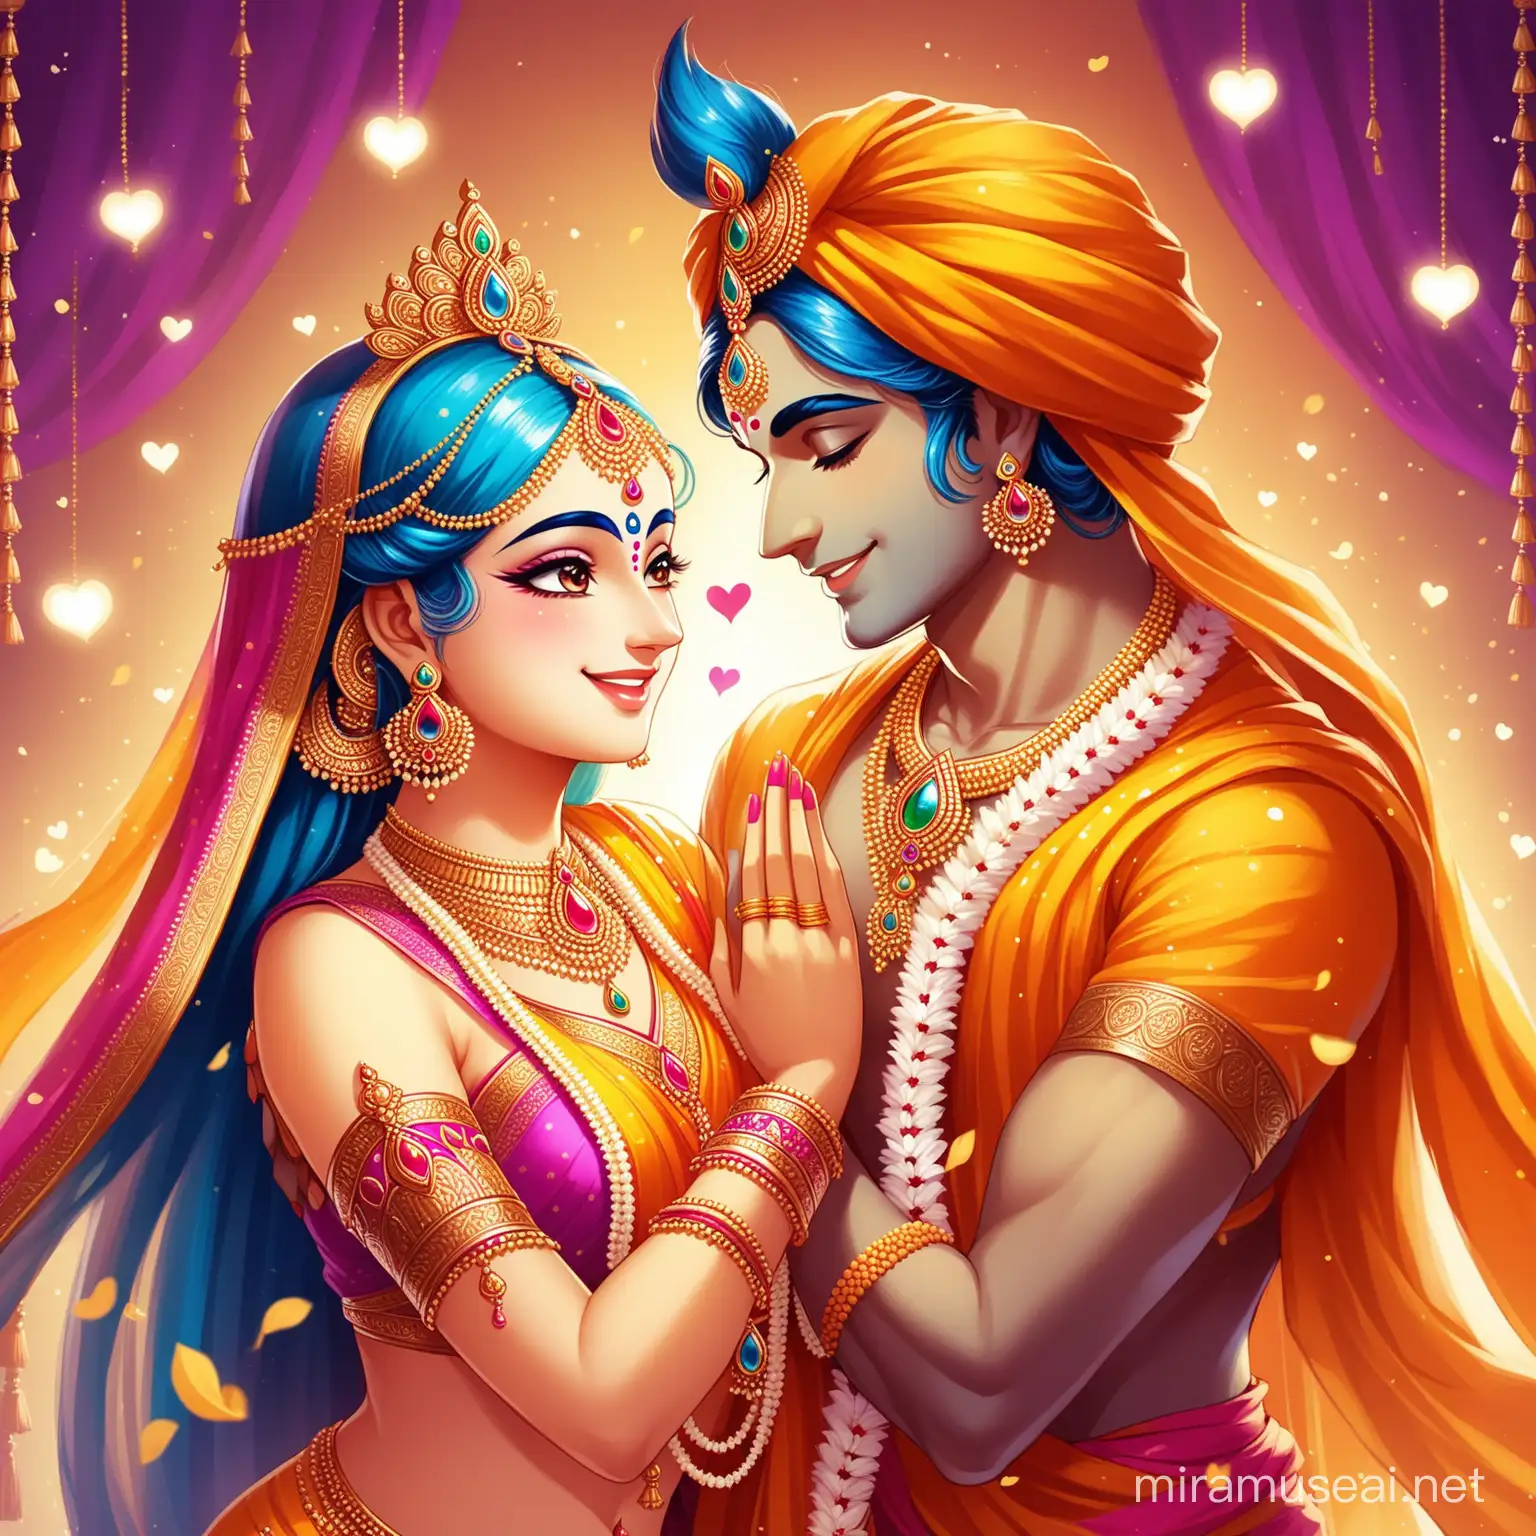 Radha Krishna, Krishna super handsome and charming, Radha divine beauty,naughty couple, picture of love, happy and playing, super cute